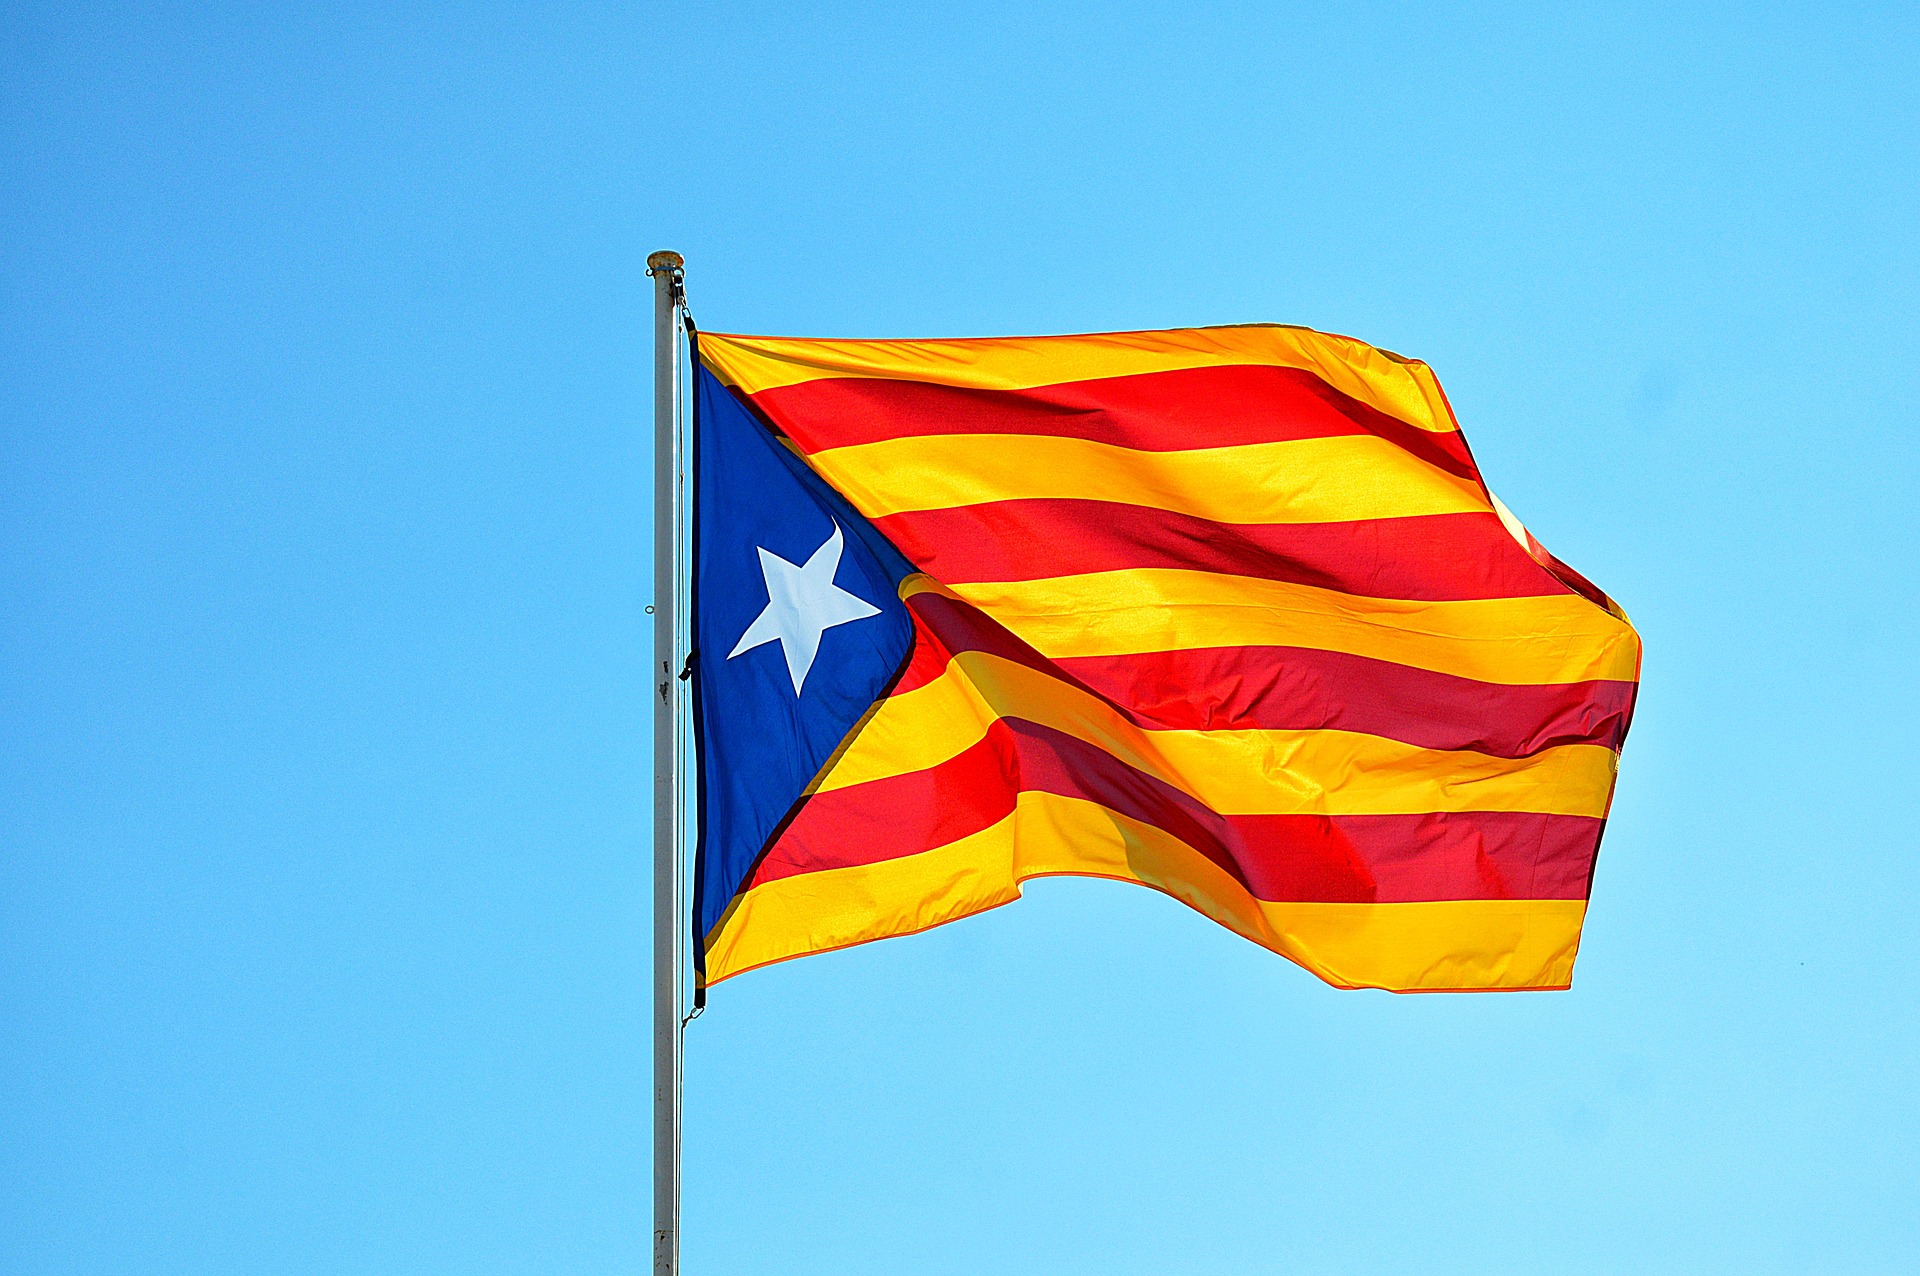 GW4 ACADEMIC DISCUSSES WHAT THE CATALONIAN ELECTION MEANS FOR SPAIN